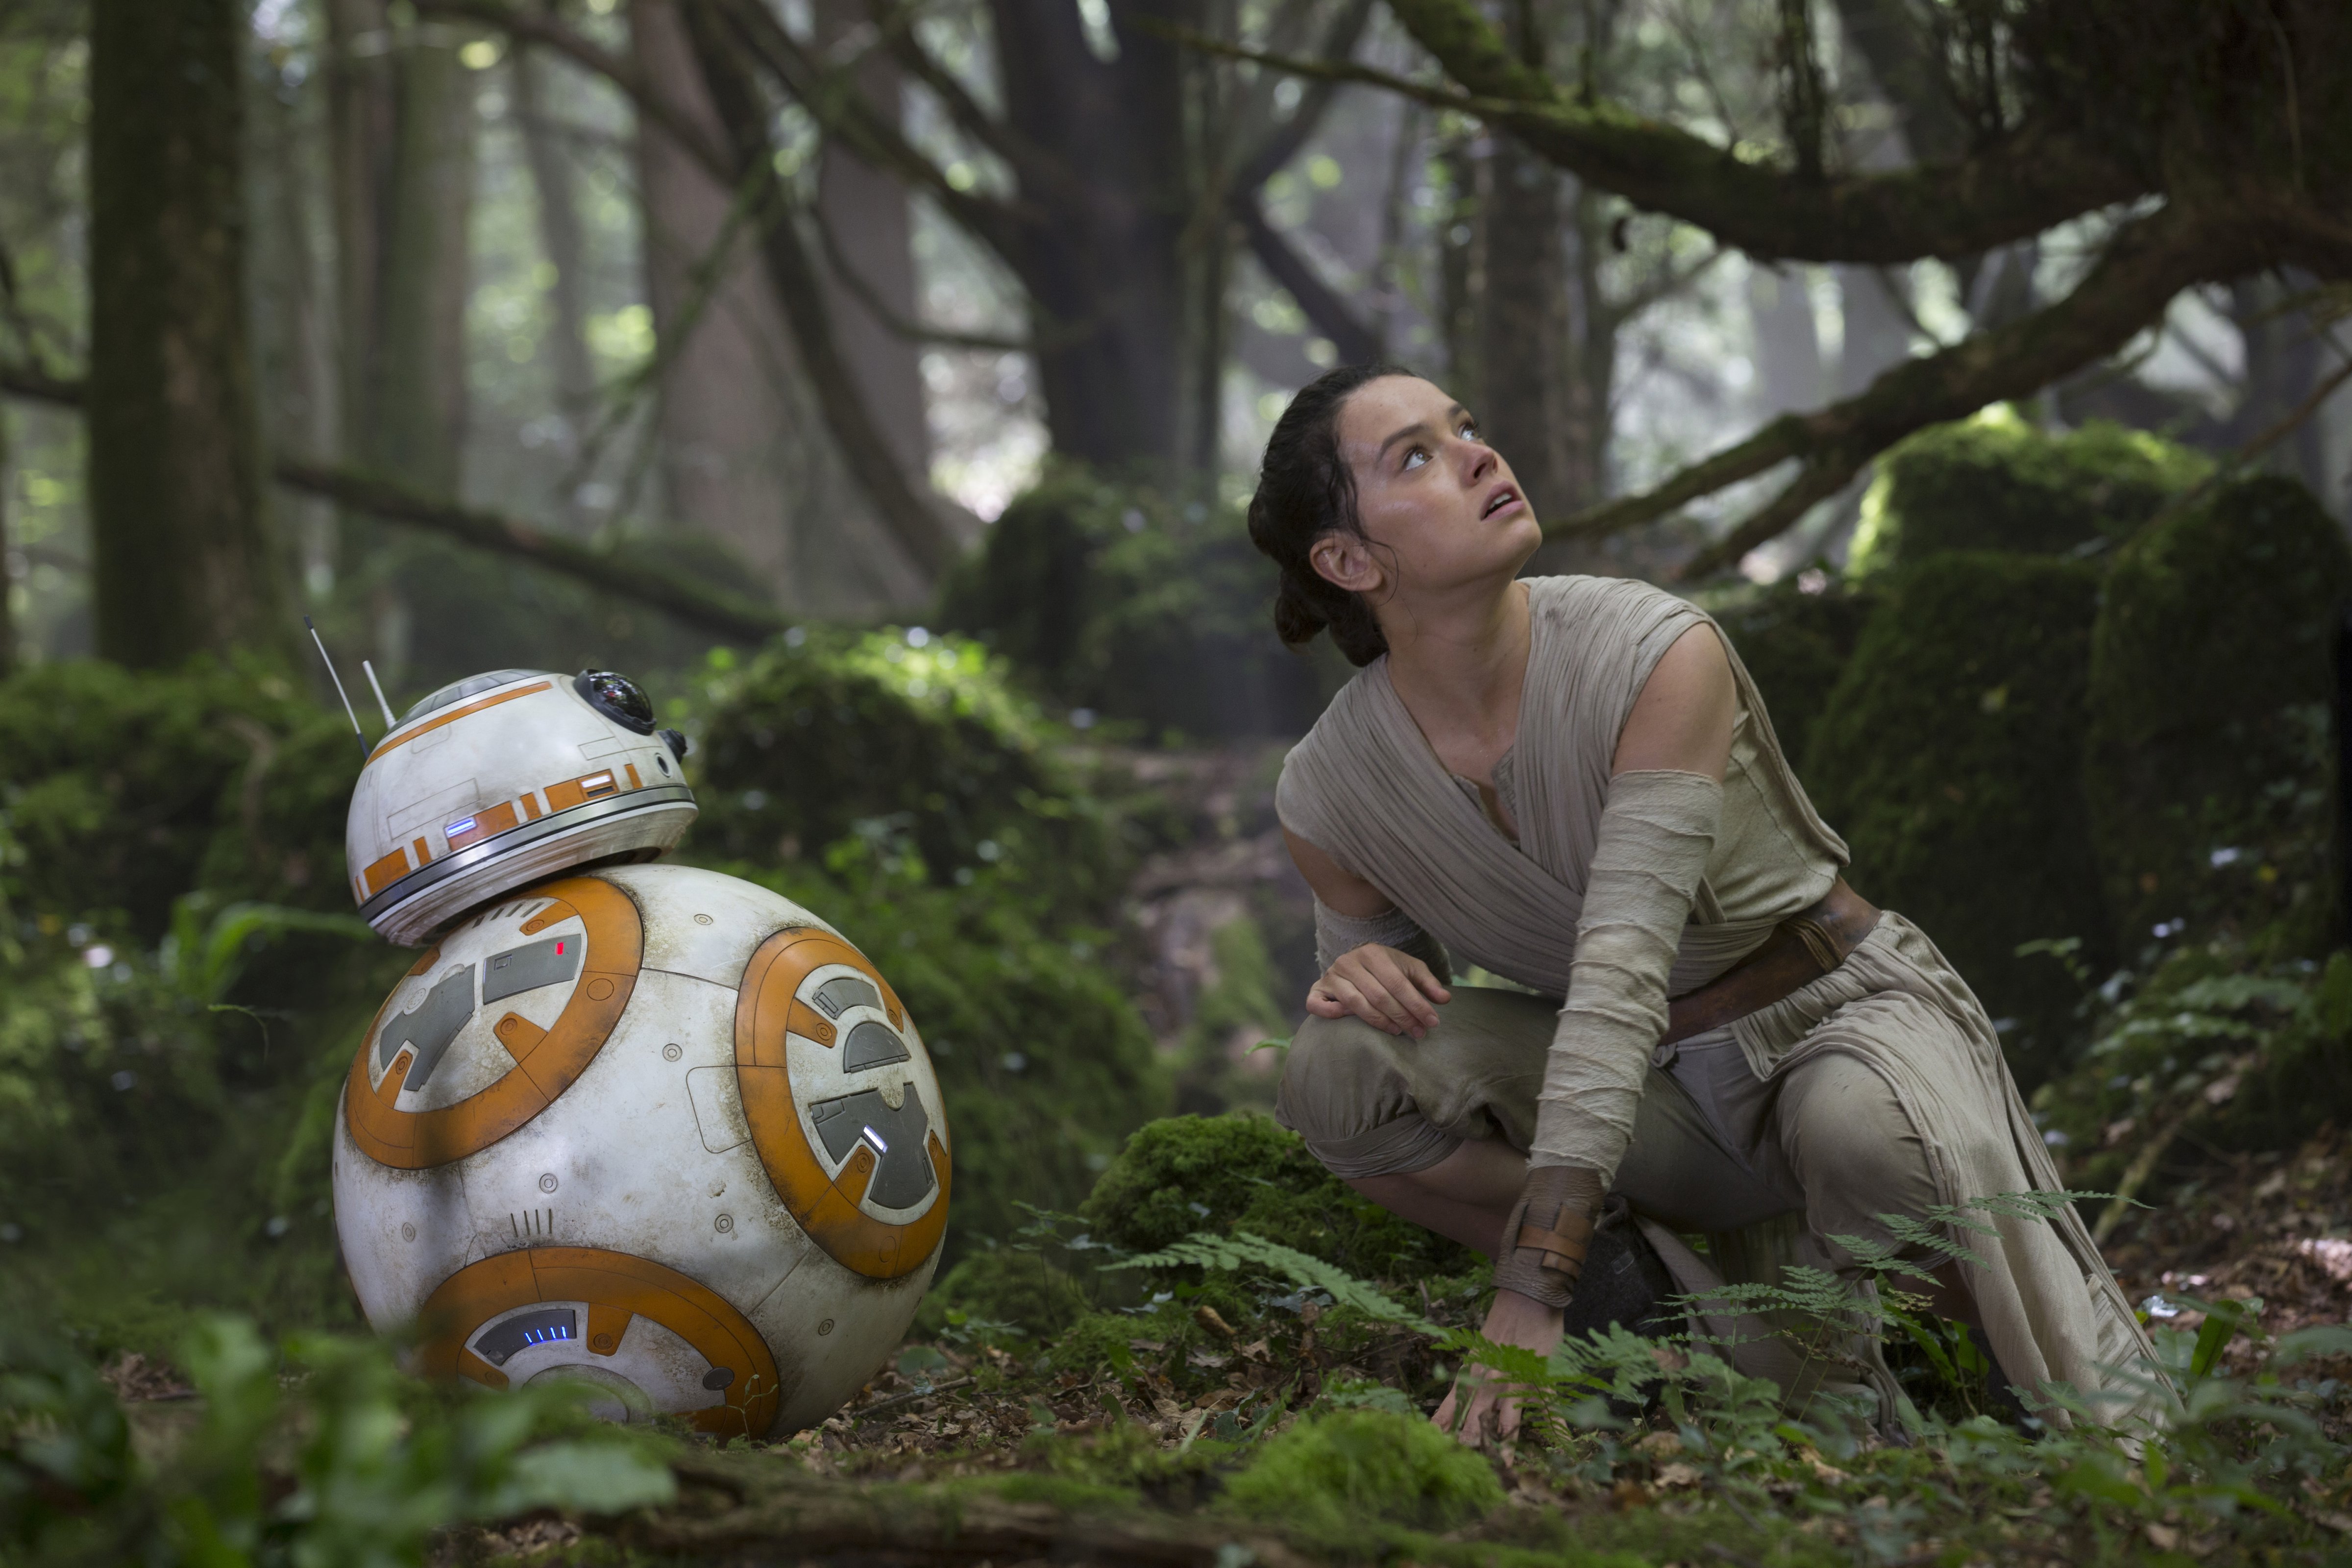 BB-8 and Rey, Daisy Ridley, in "Star Wars: The Force Awakens." (David James—Lucasfilm Ltd.)